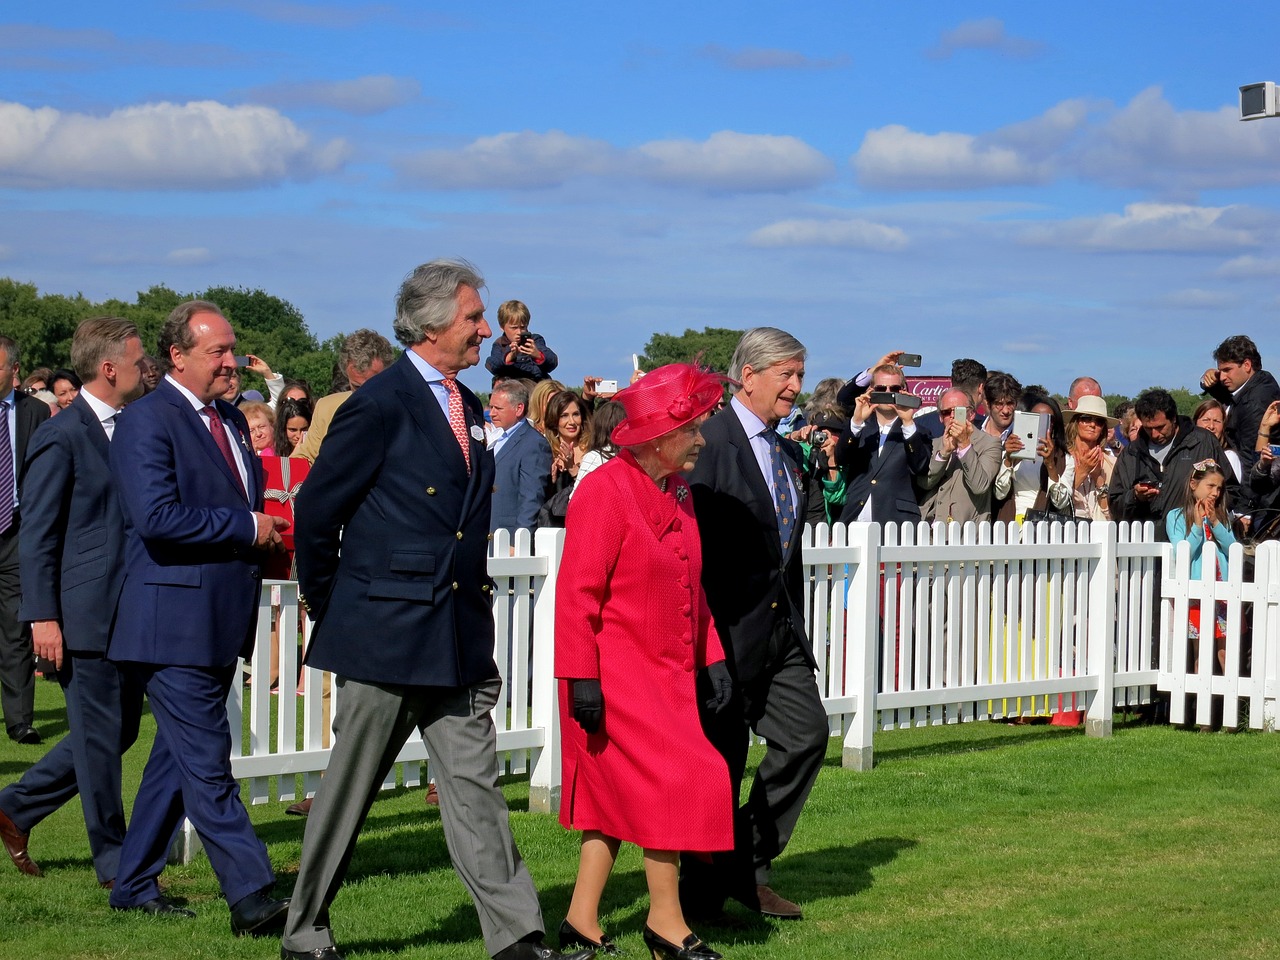 Queen Elizabeth II and entourage attending the British Ladies Open Polo Championships.